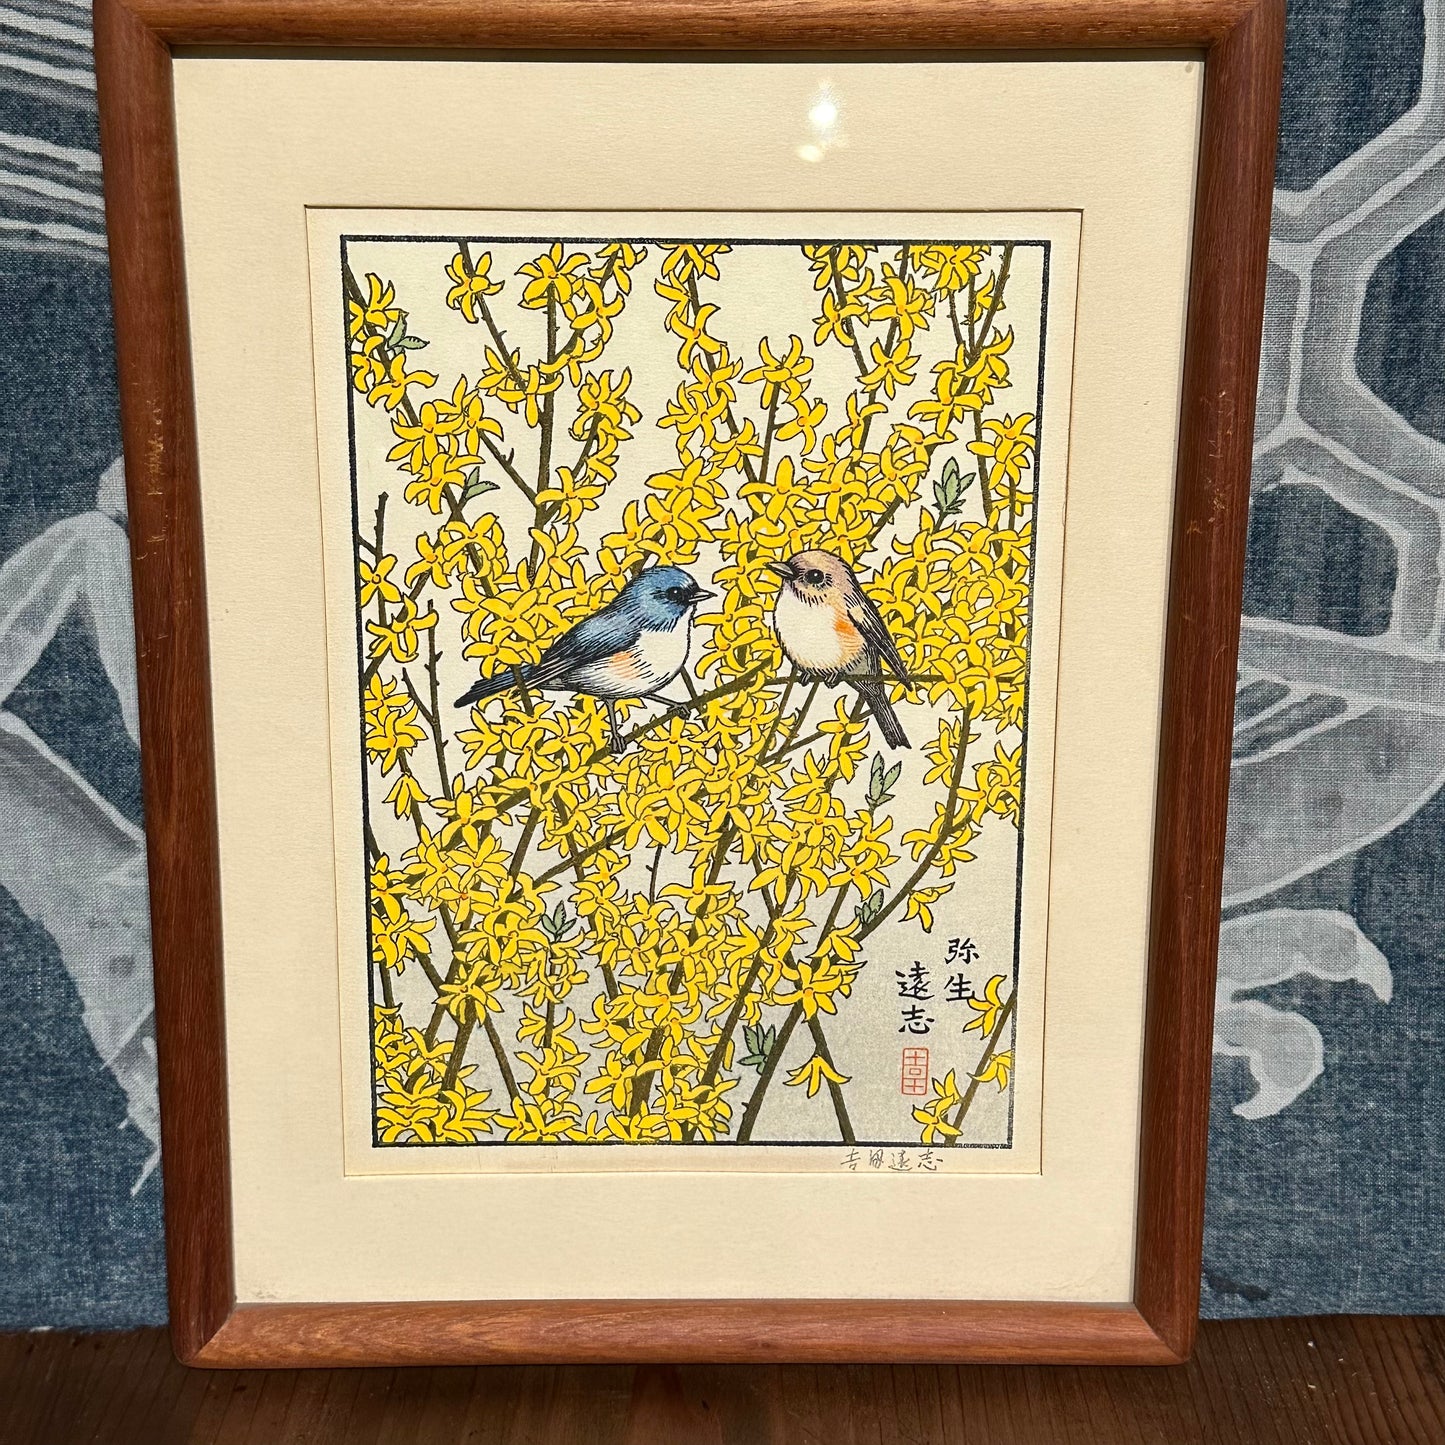 Toshi Yoshida Woodblock Print "Flowers & Birds" Very Rare Complete Set of 12 Months Signed